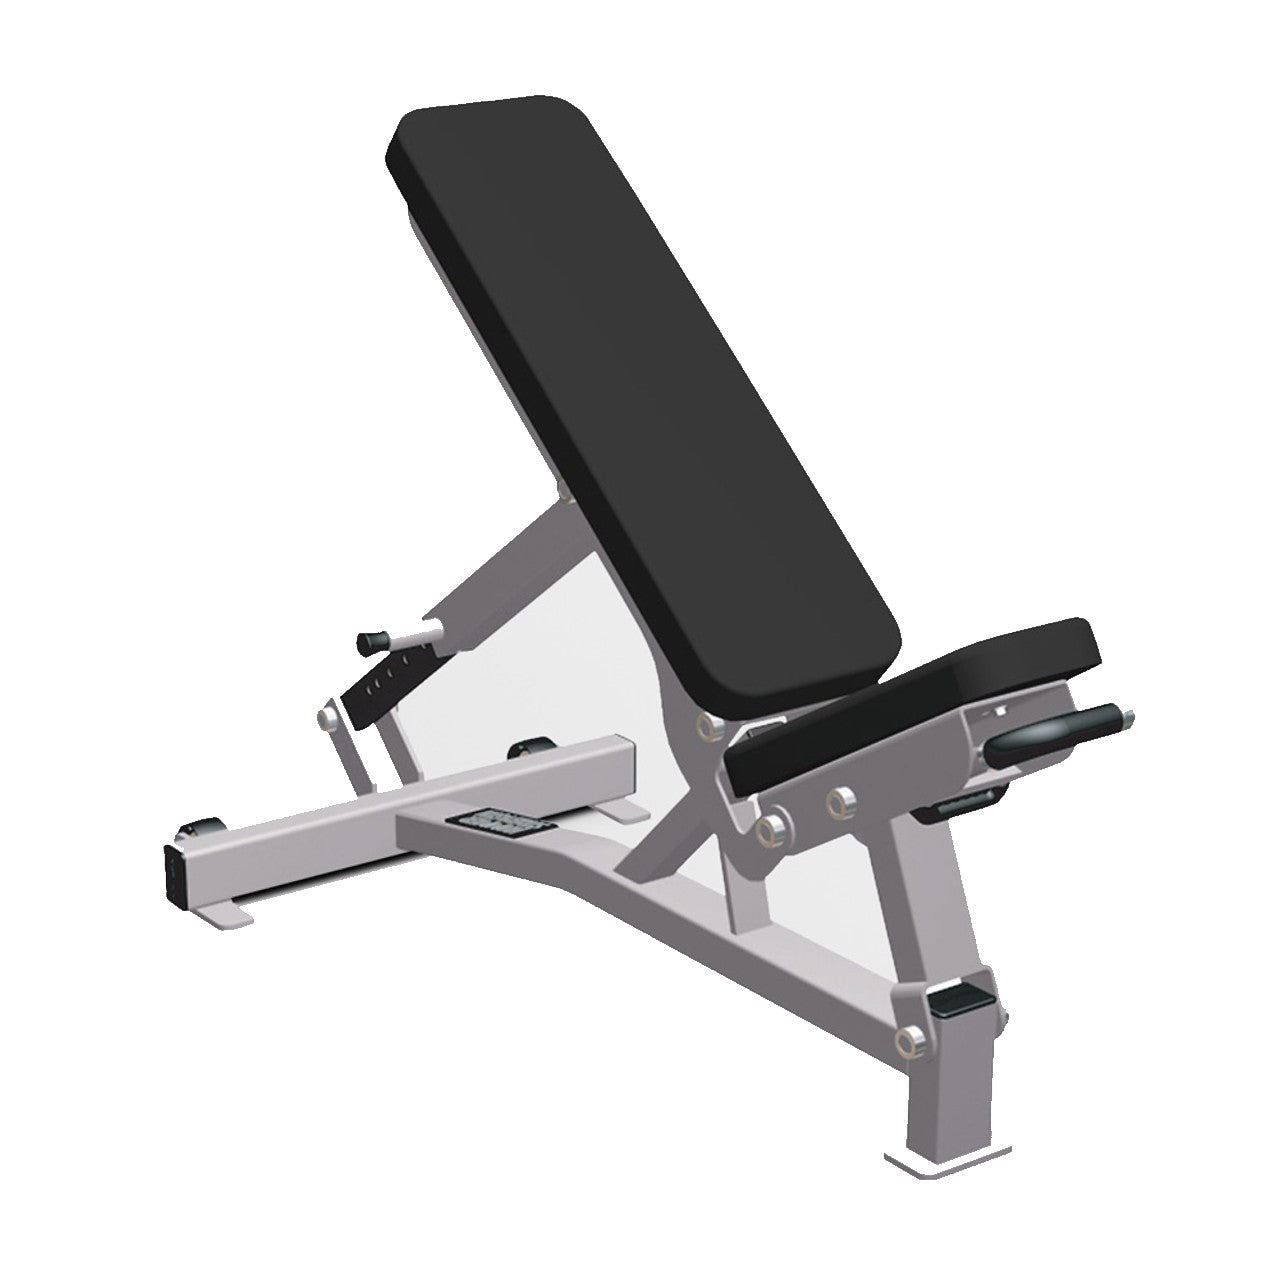 Weight Benches